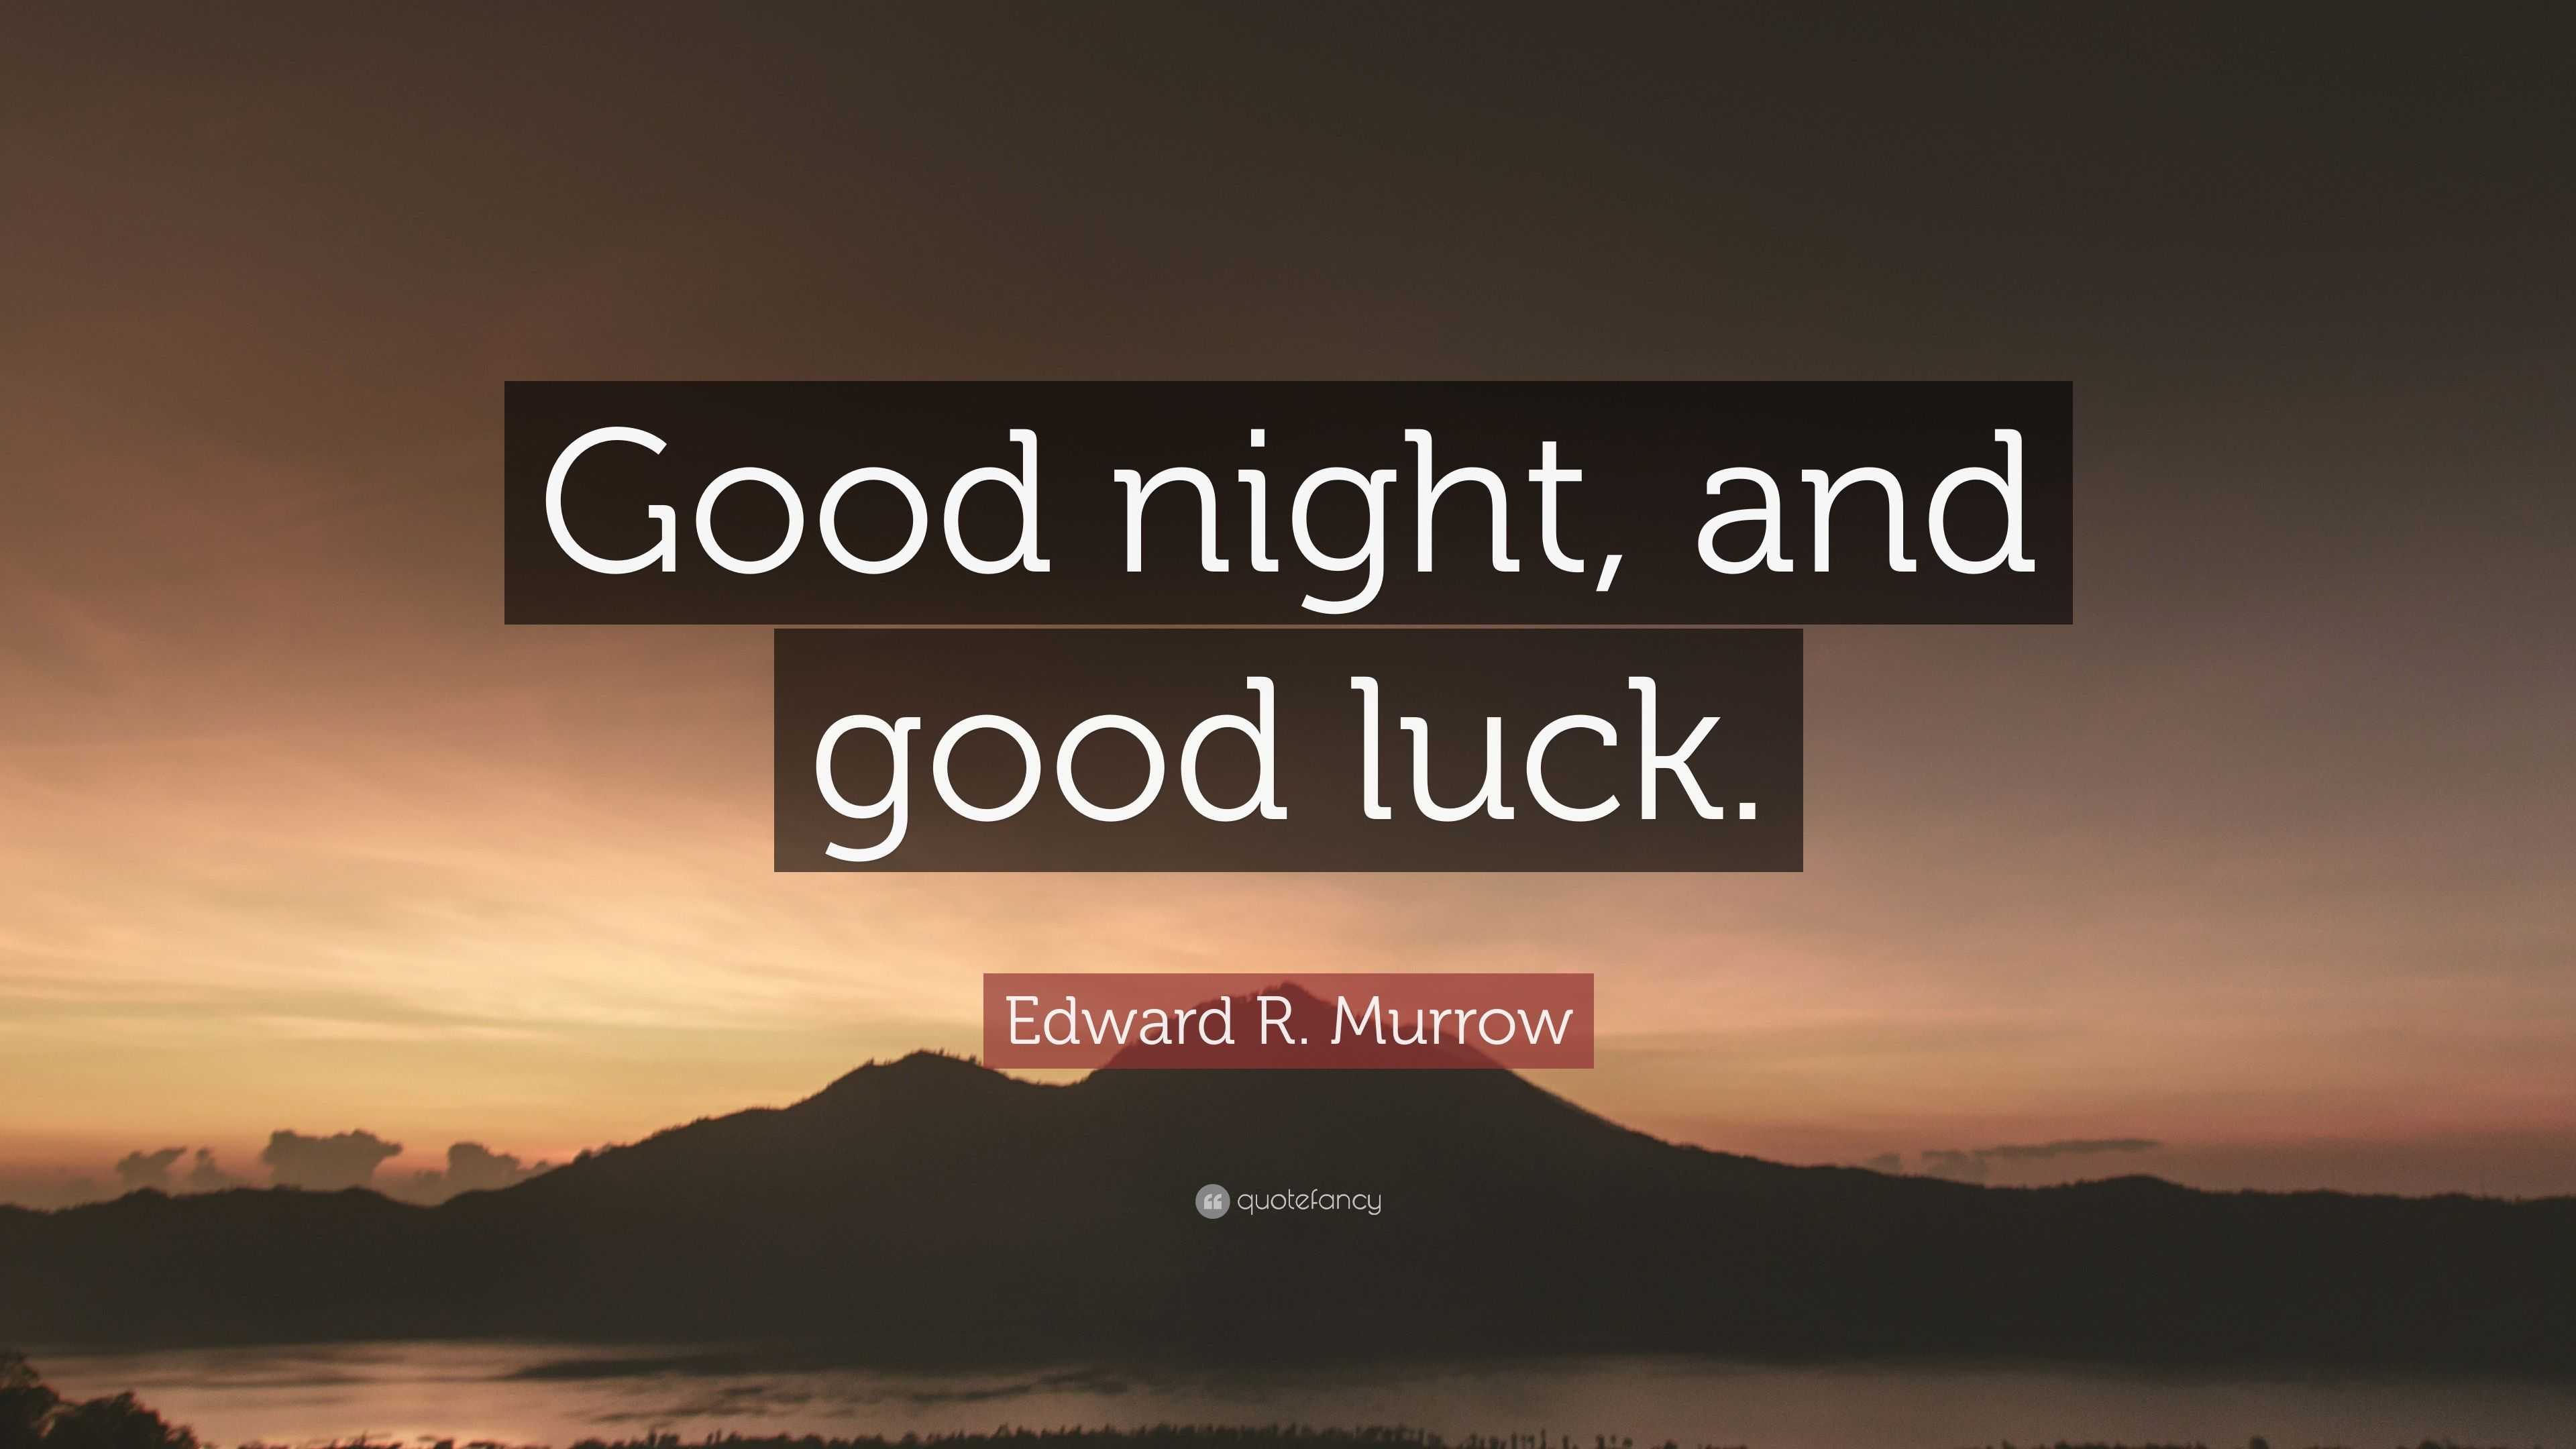 Edward R. Murrow In The Film Good Night And Good Luck